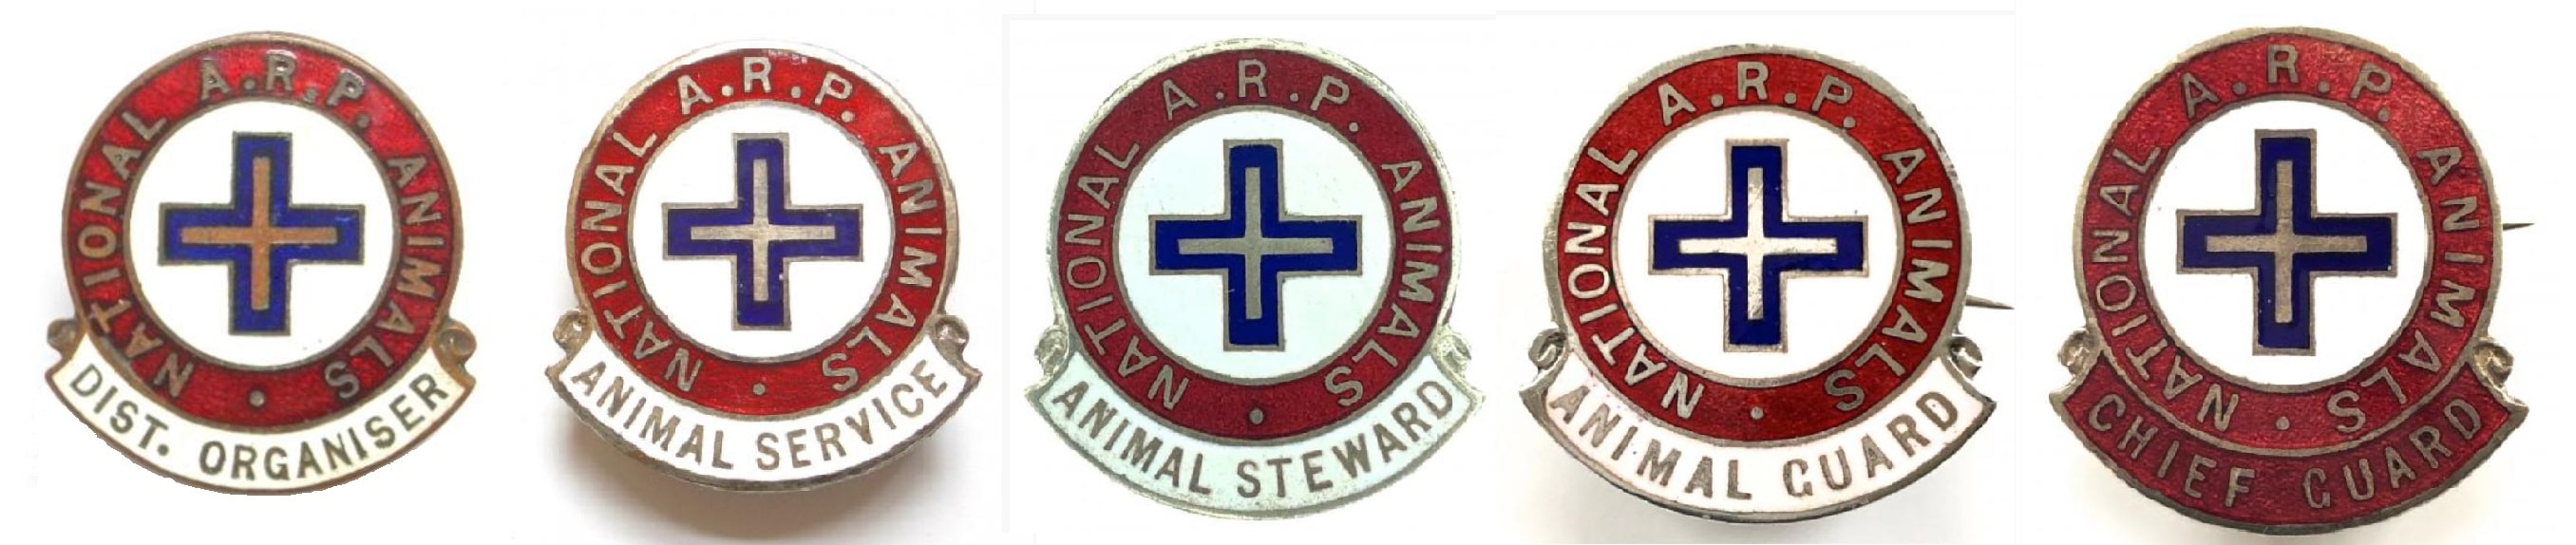 Some of the more common National Air Raid Precautions Animals Committee (NARPAC) badges found